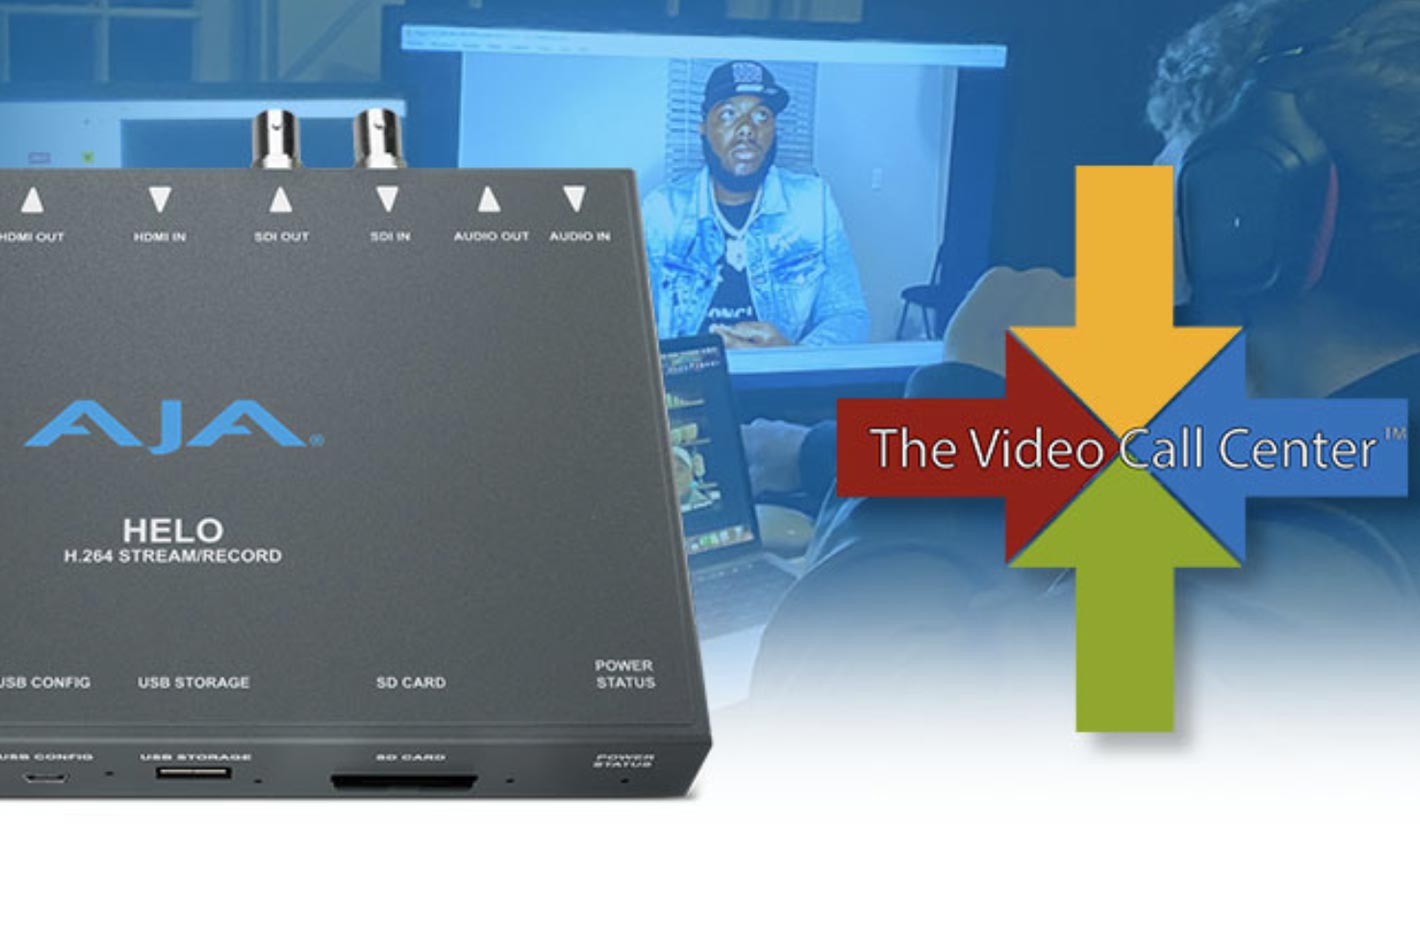 The Video Call Center - VCC - redefines live video remotes